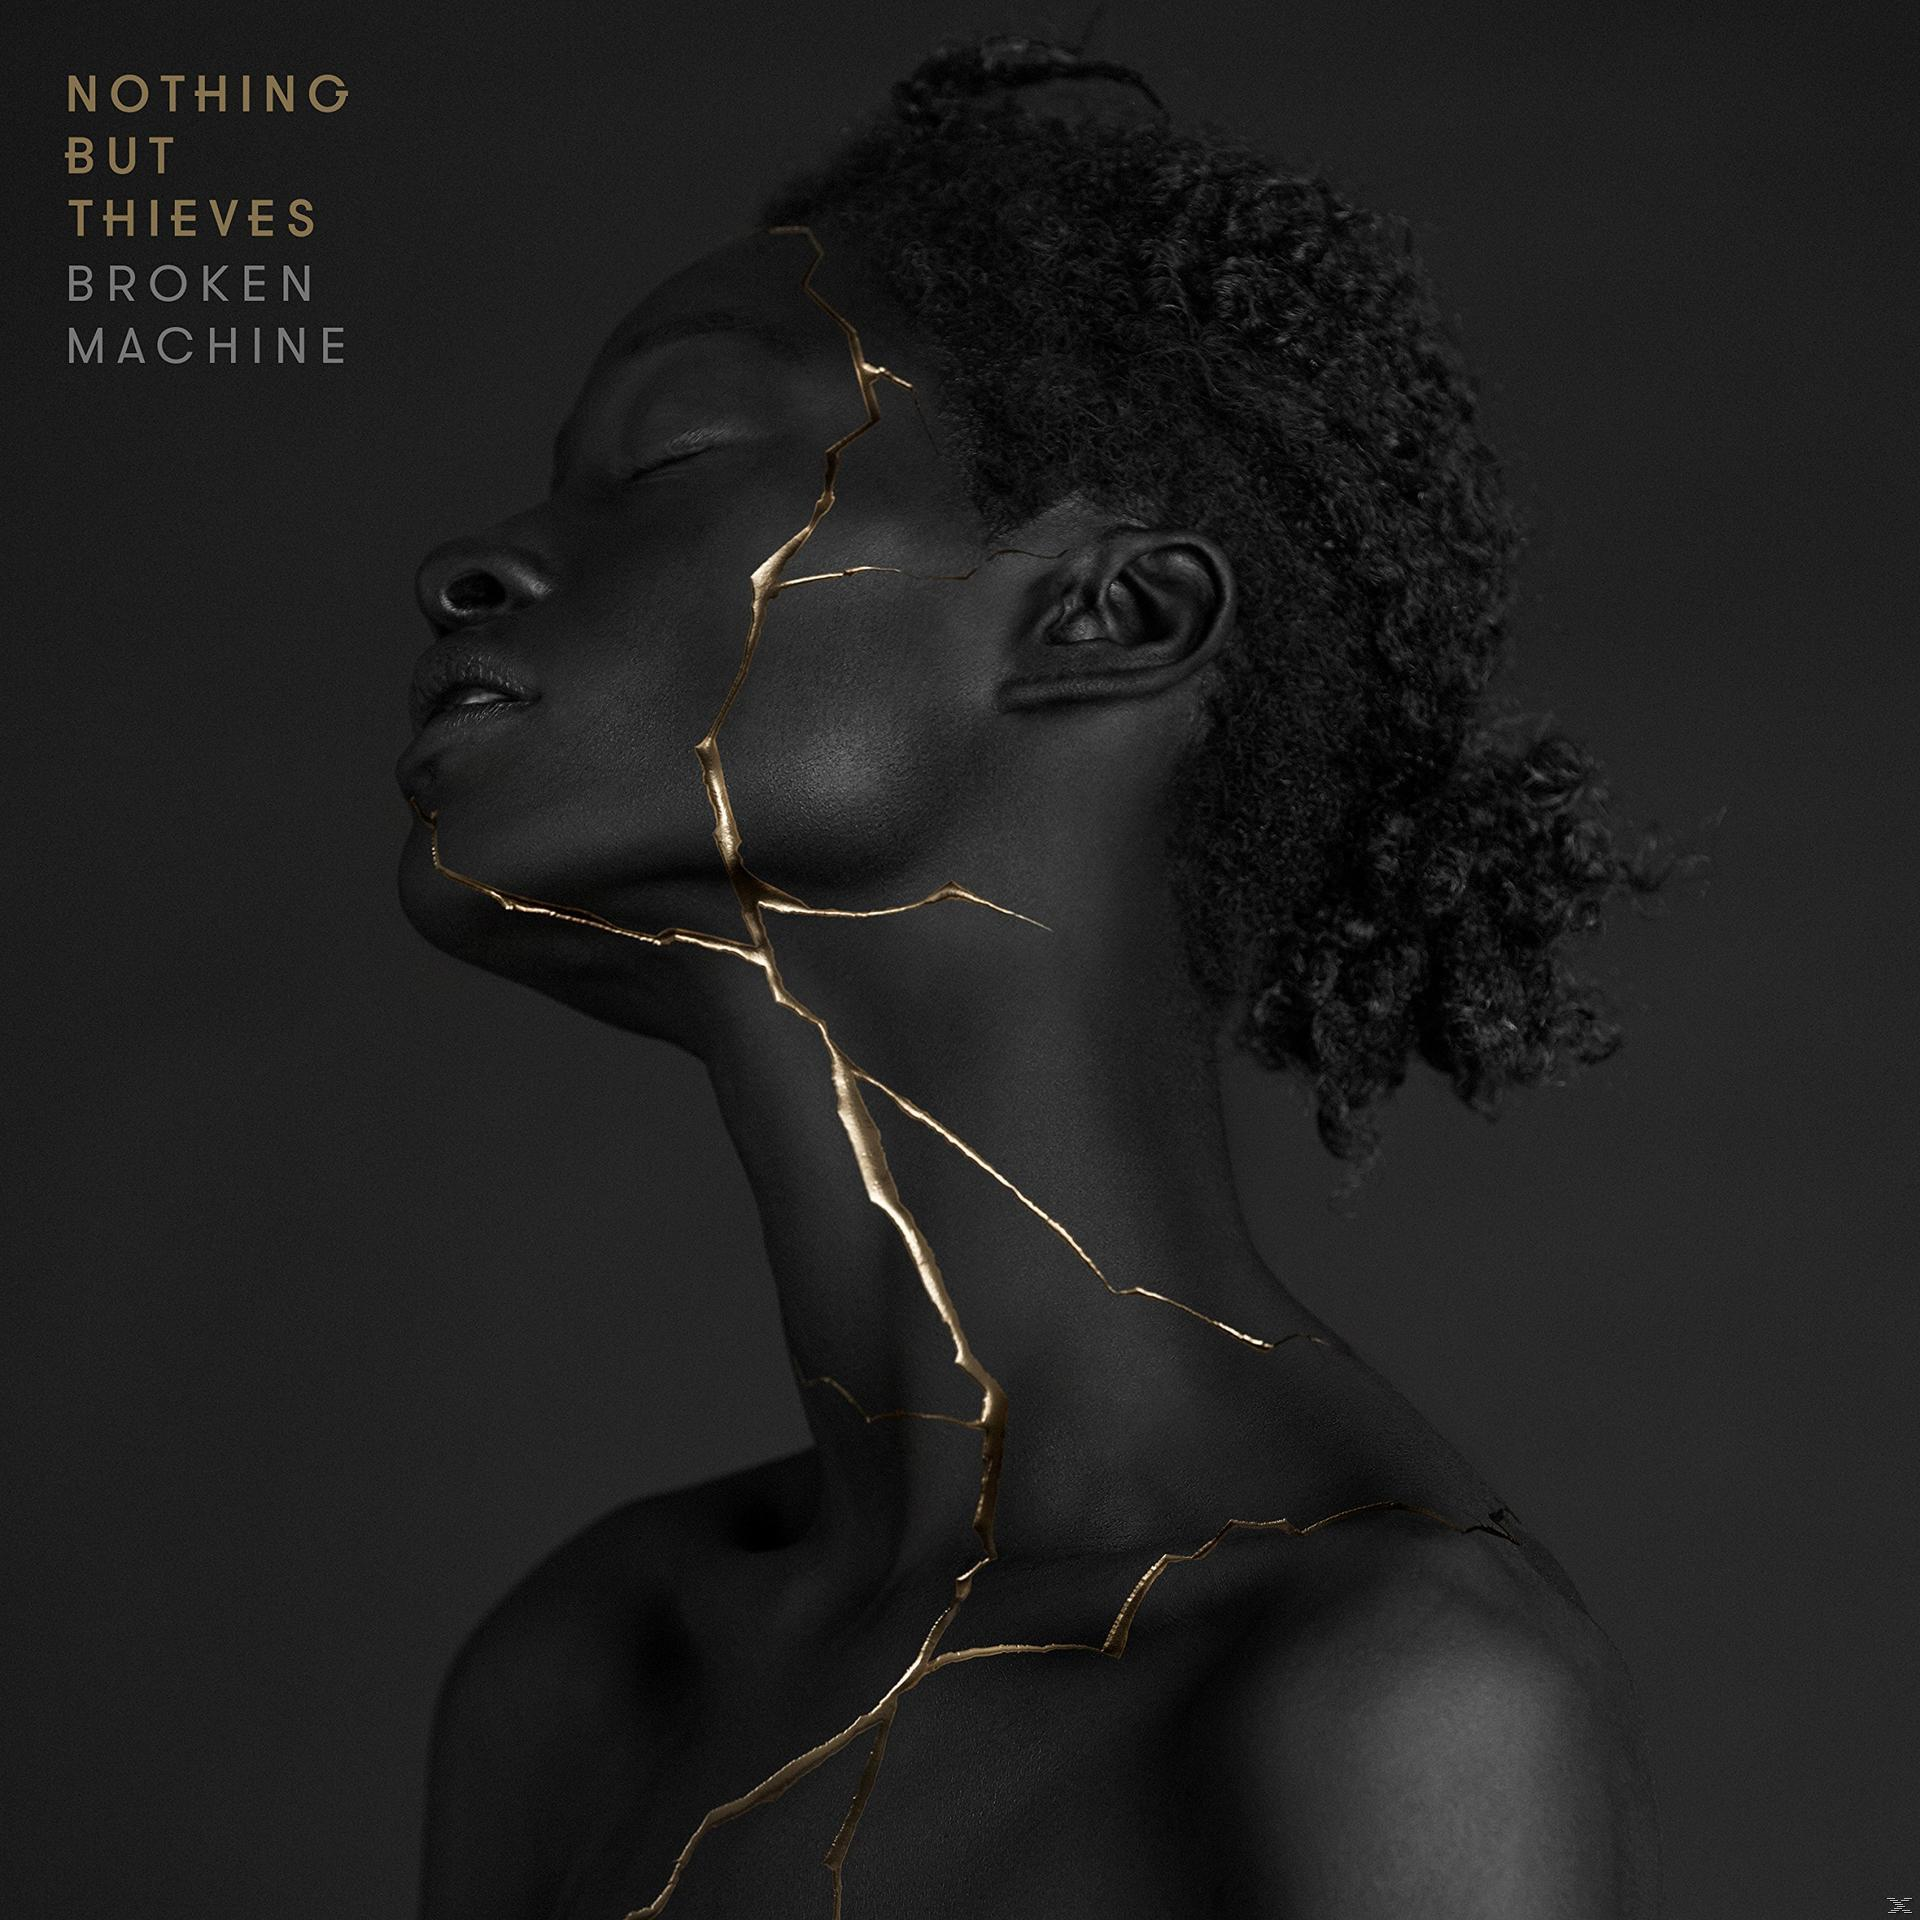 Nothing But Thieves - Broken (CD) Machine - (Deluxe)